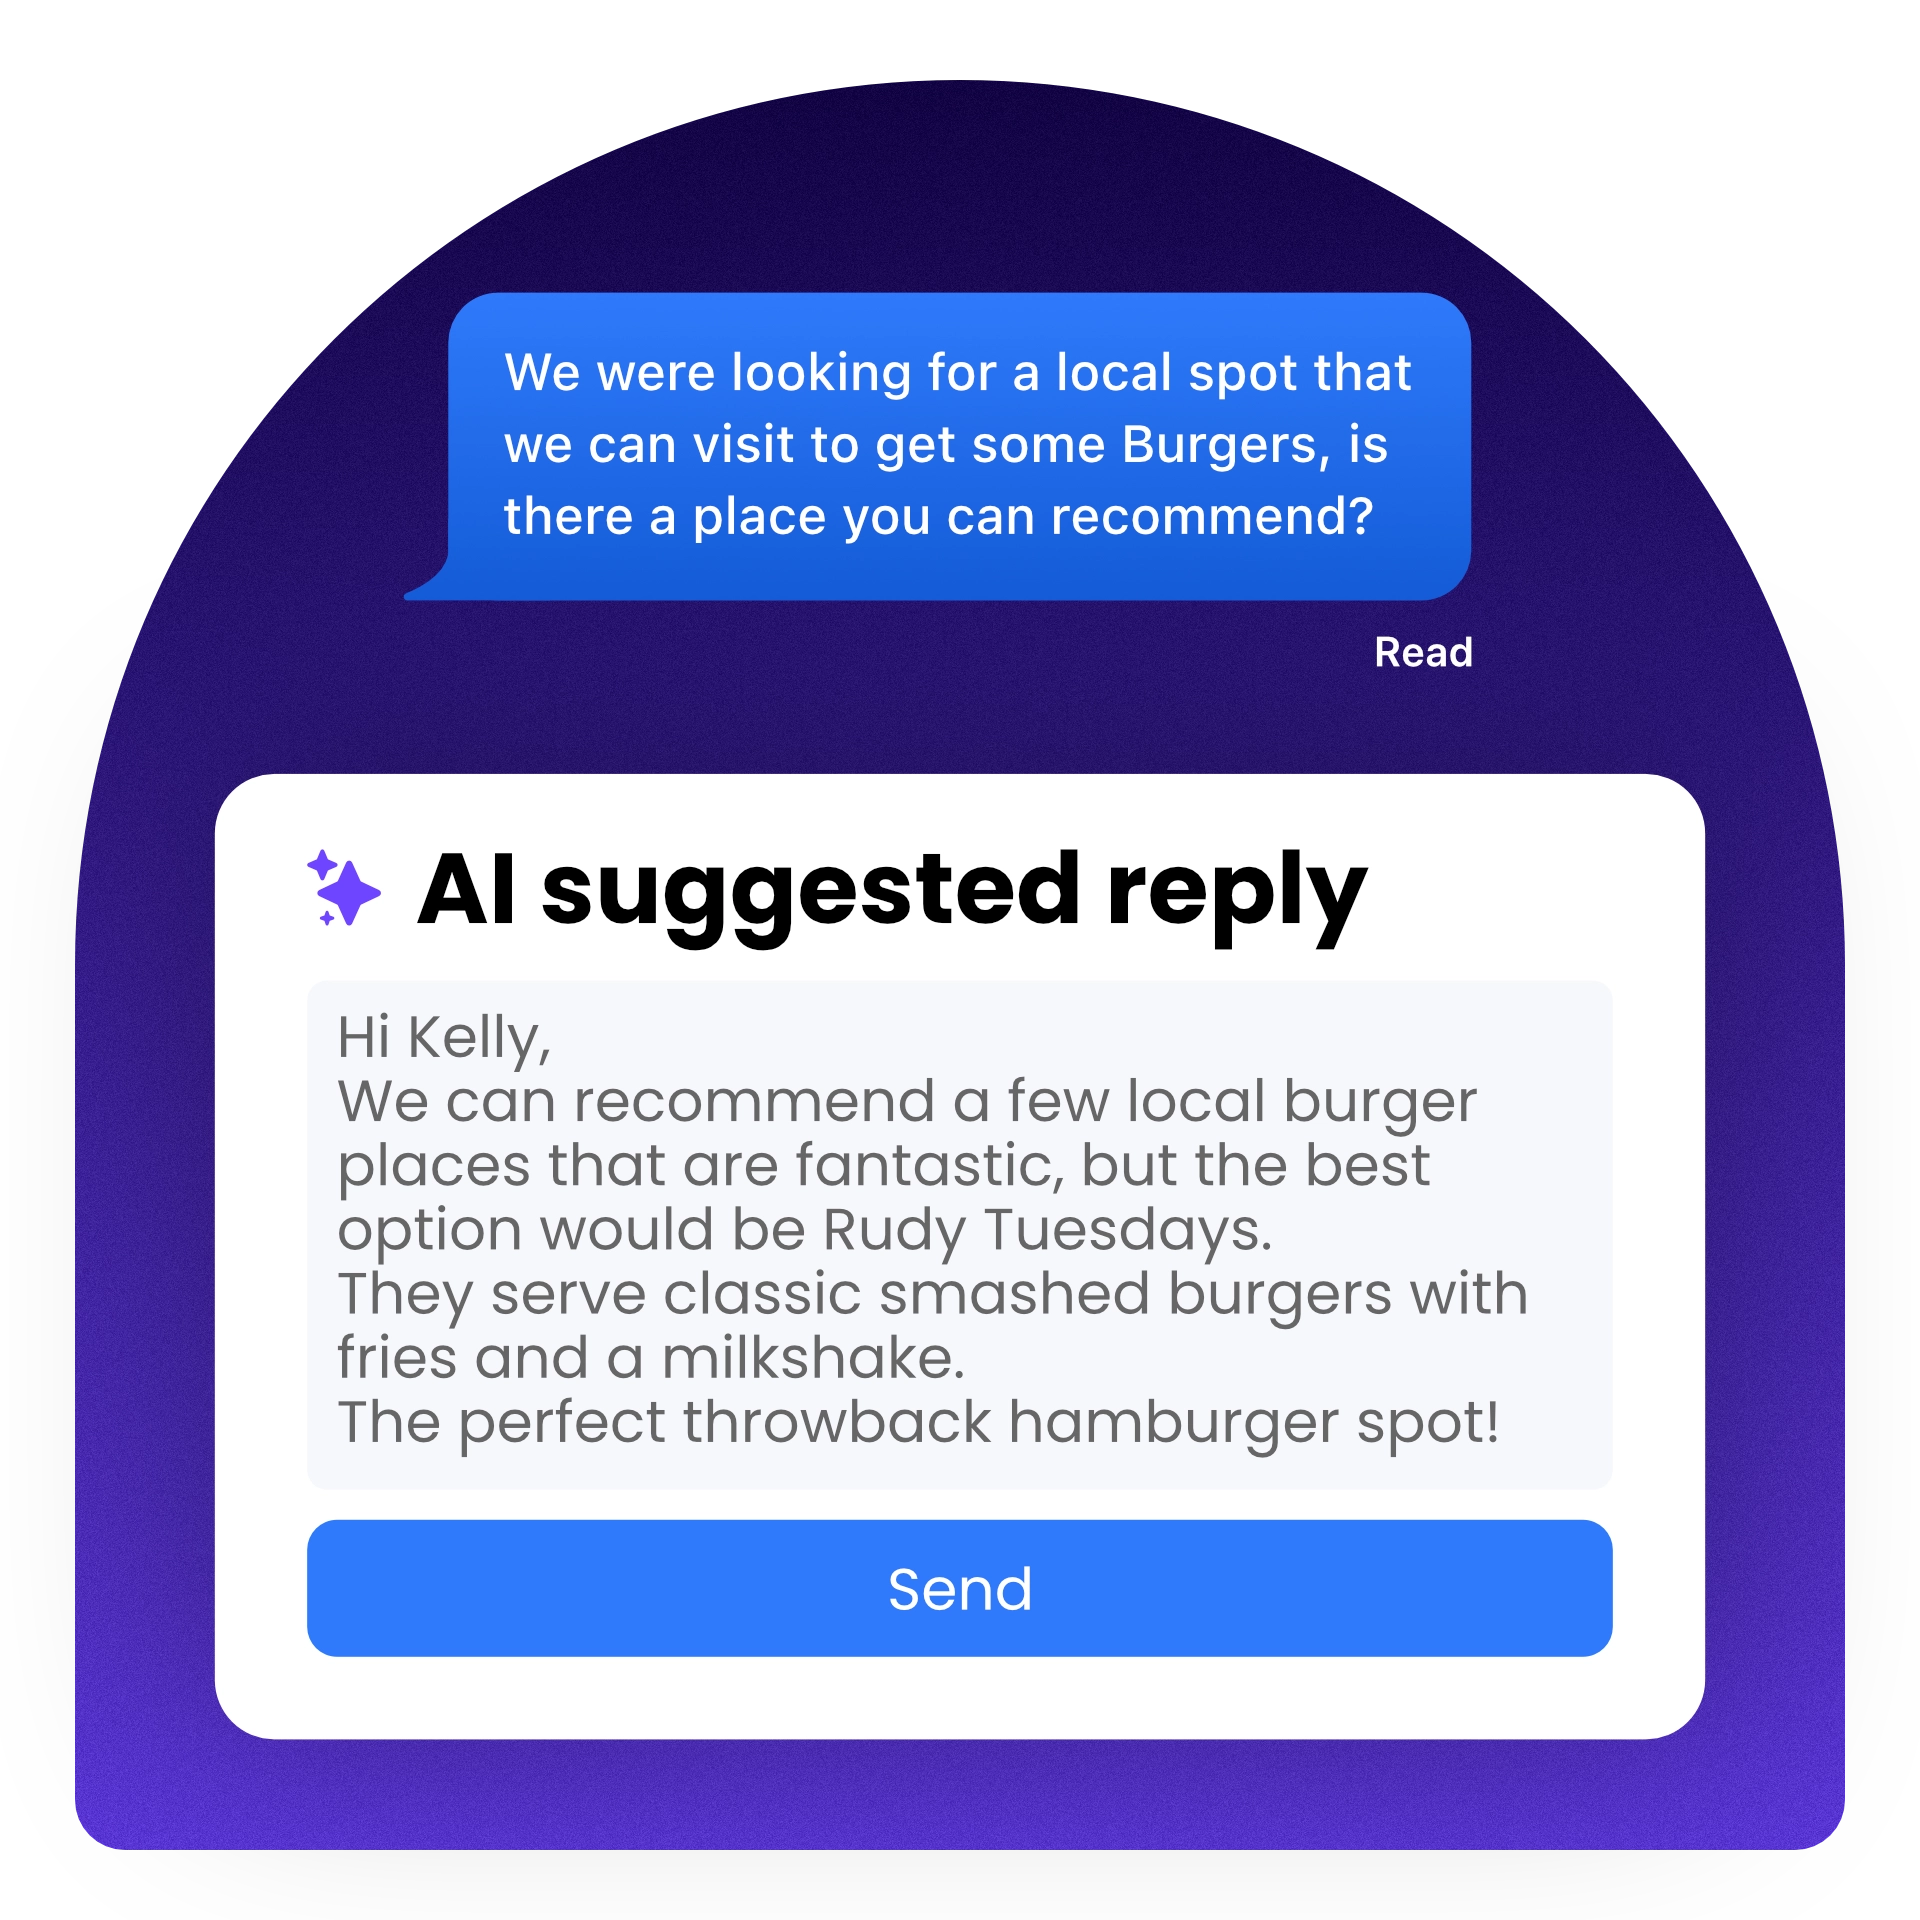 AI suggested and automated responses